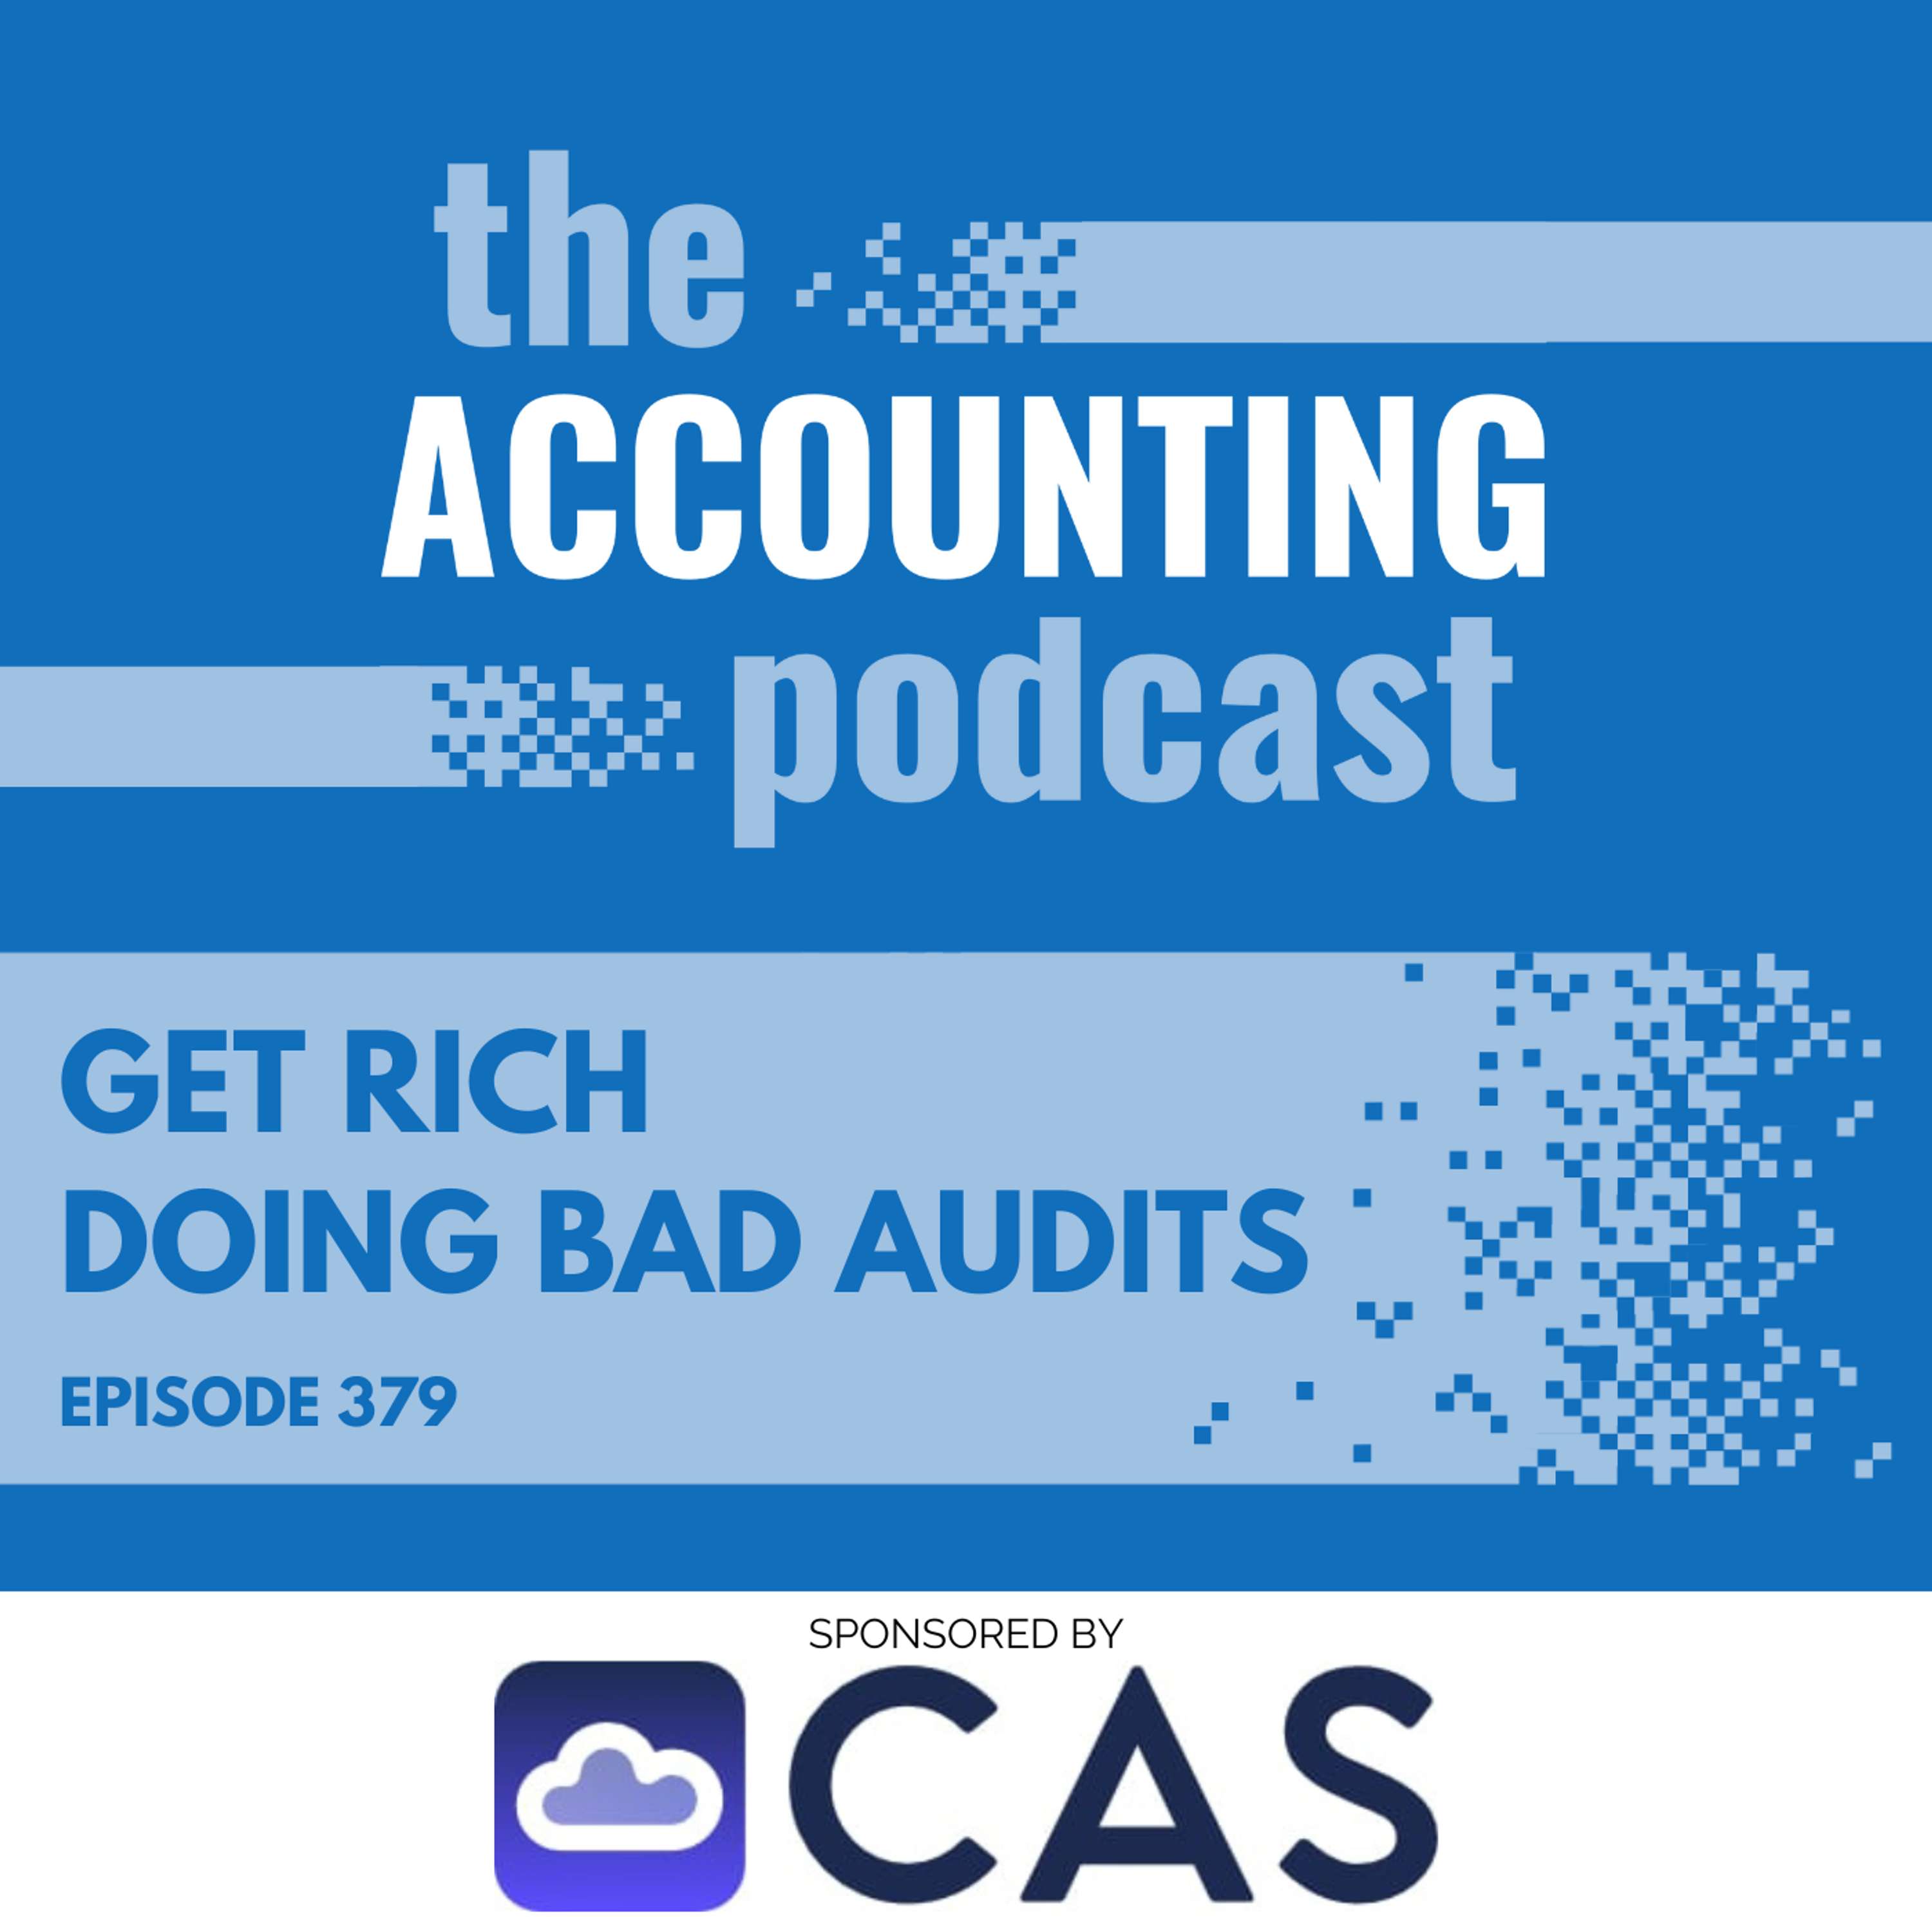 Get Rich Doing Bad Audits